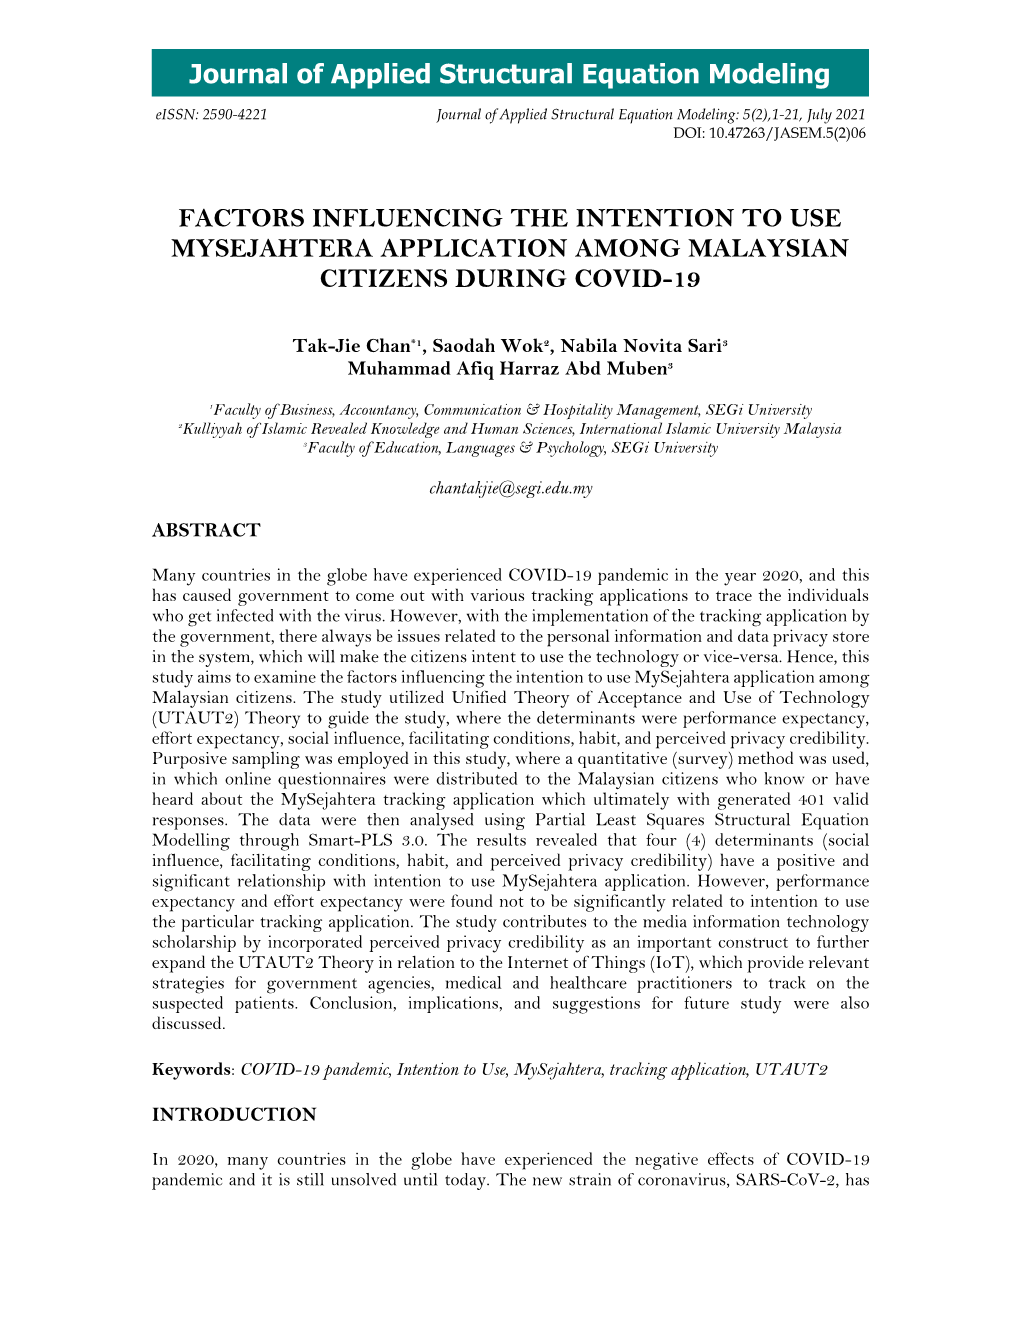 Factors Influencing the Intention to Use Mysejahtera Application Among Malaysian Citizens During Covid-19